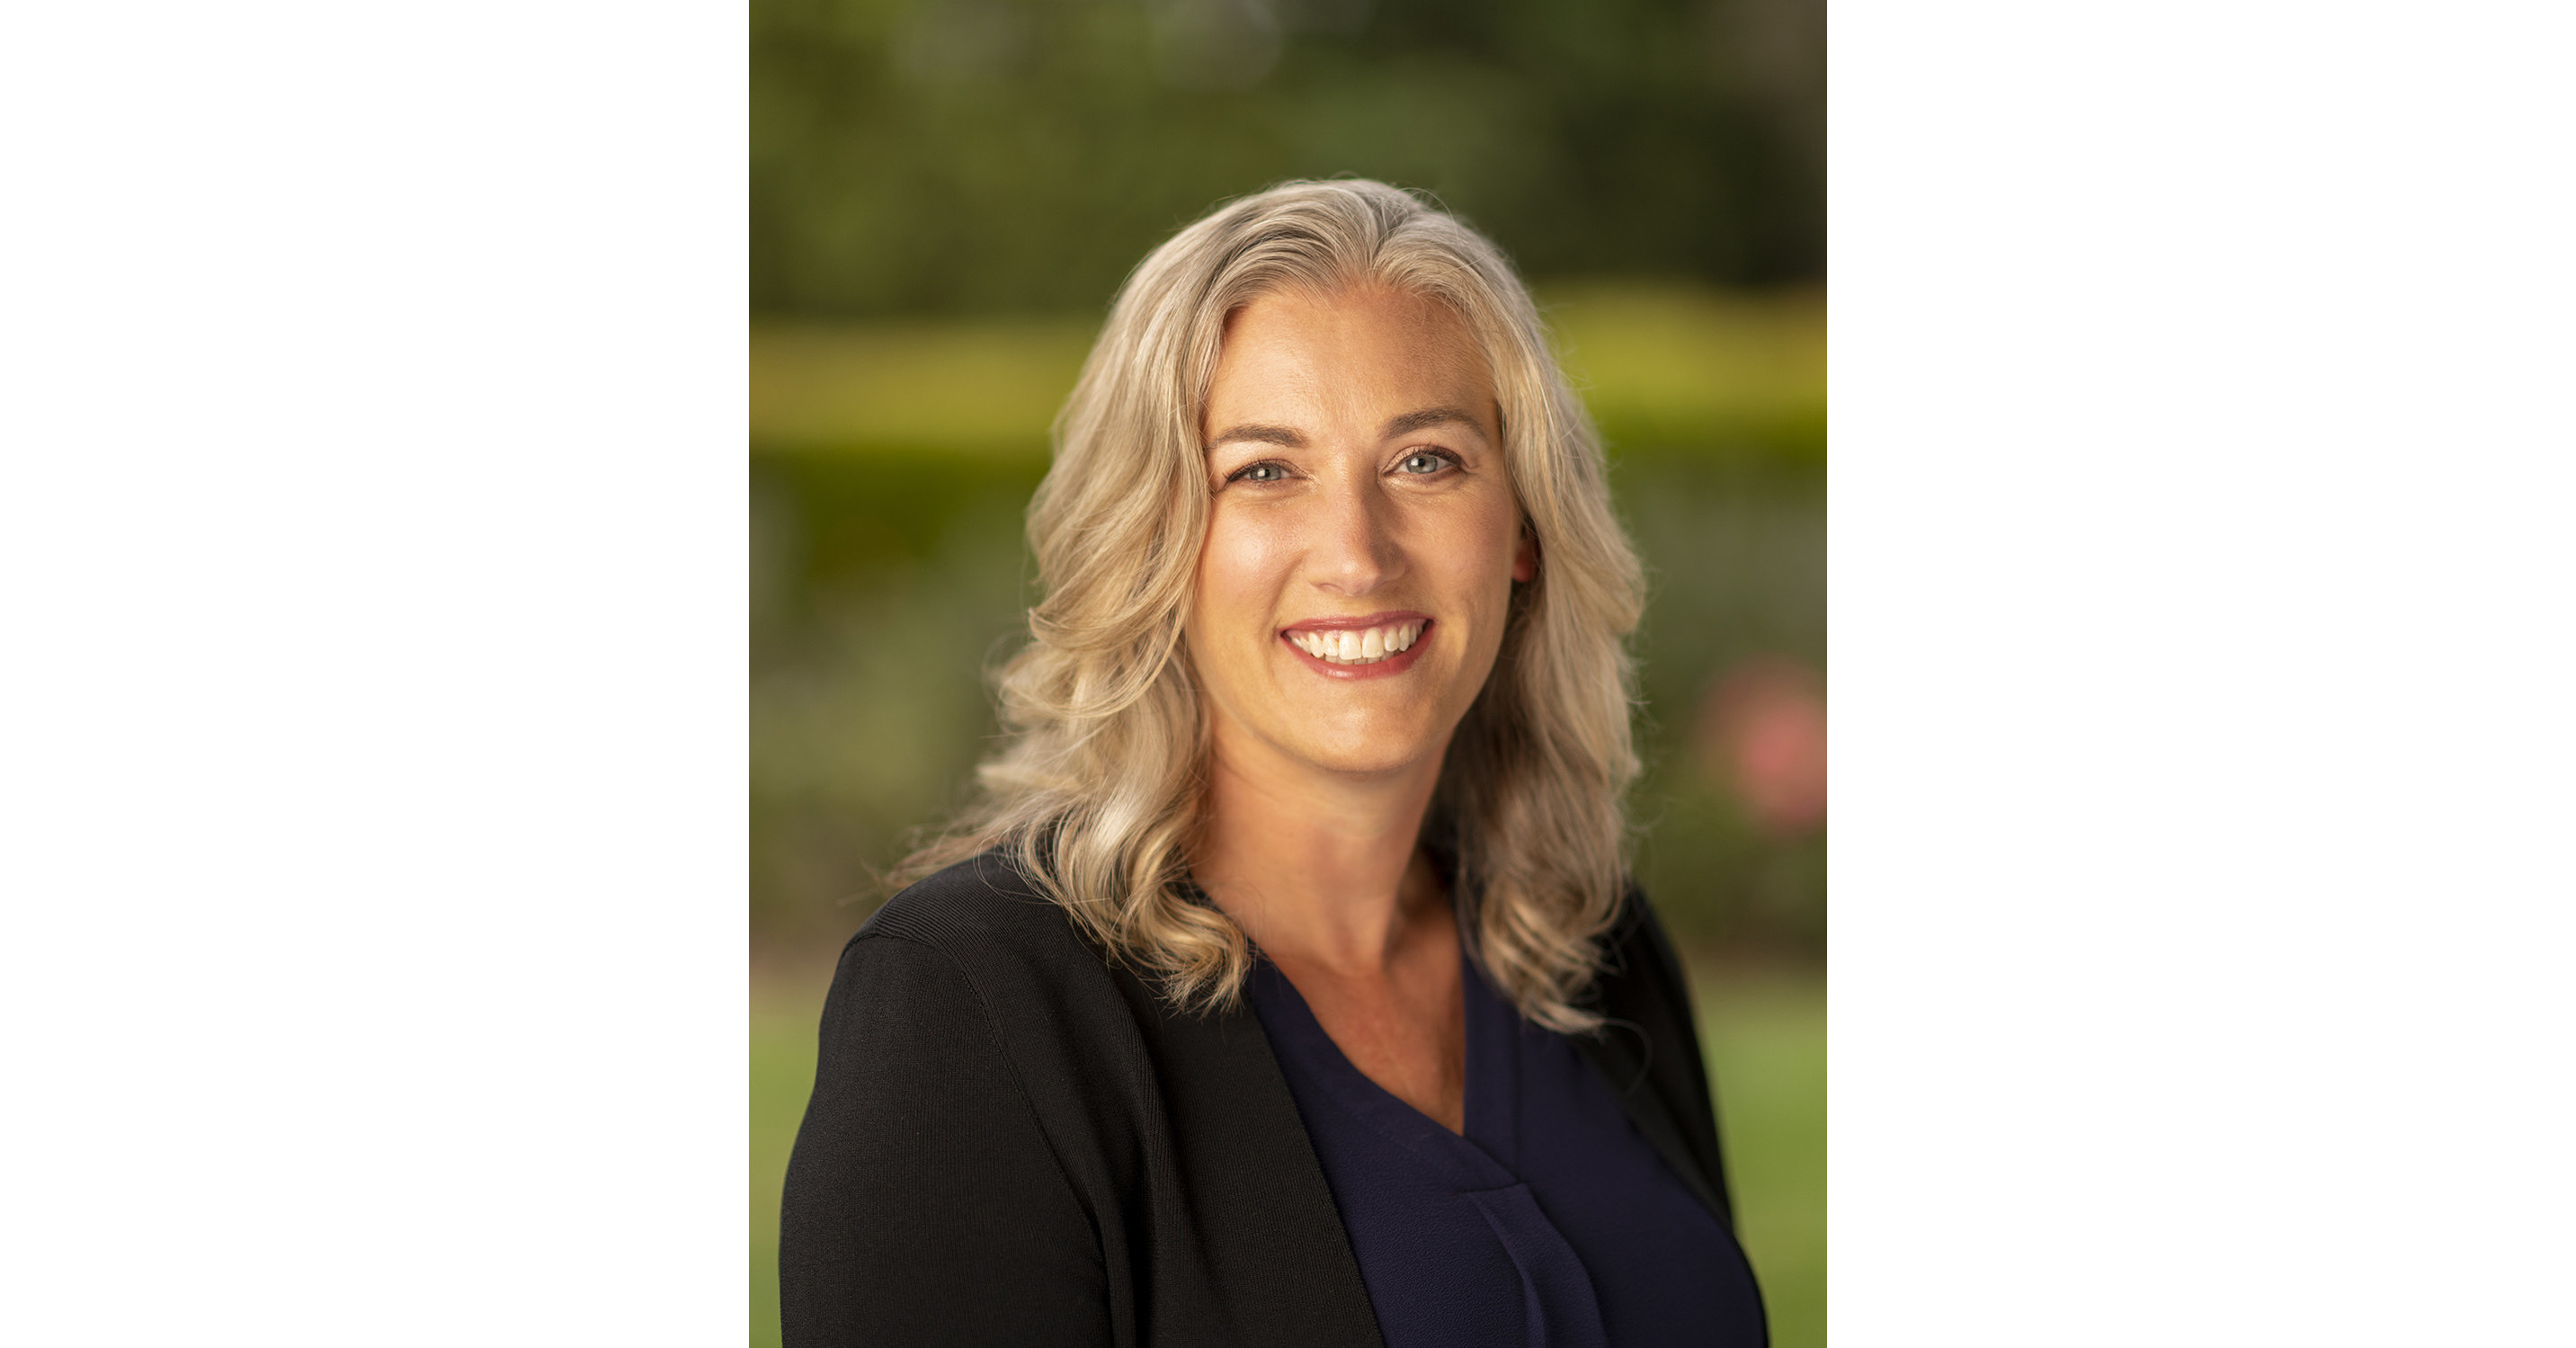 WD-40 Company Appoints Sara Hyzer as Chief Financial Officer